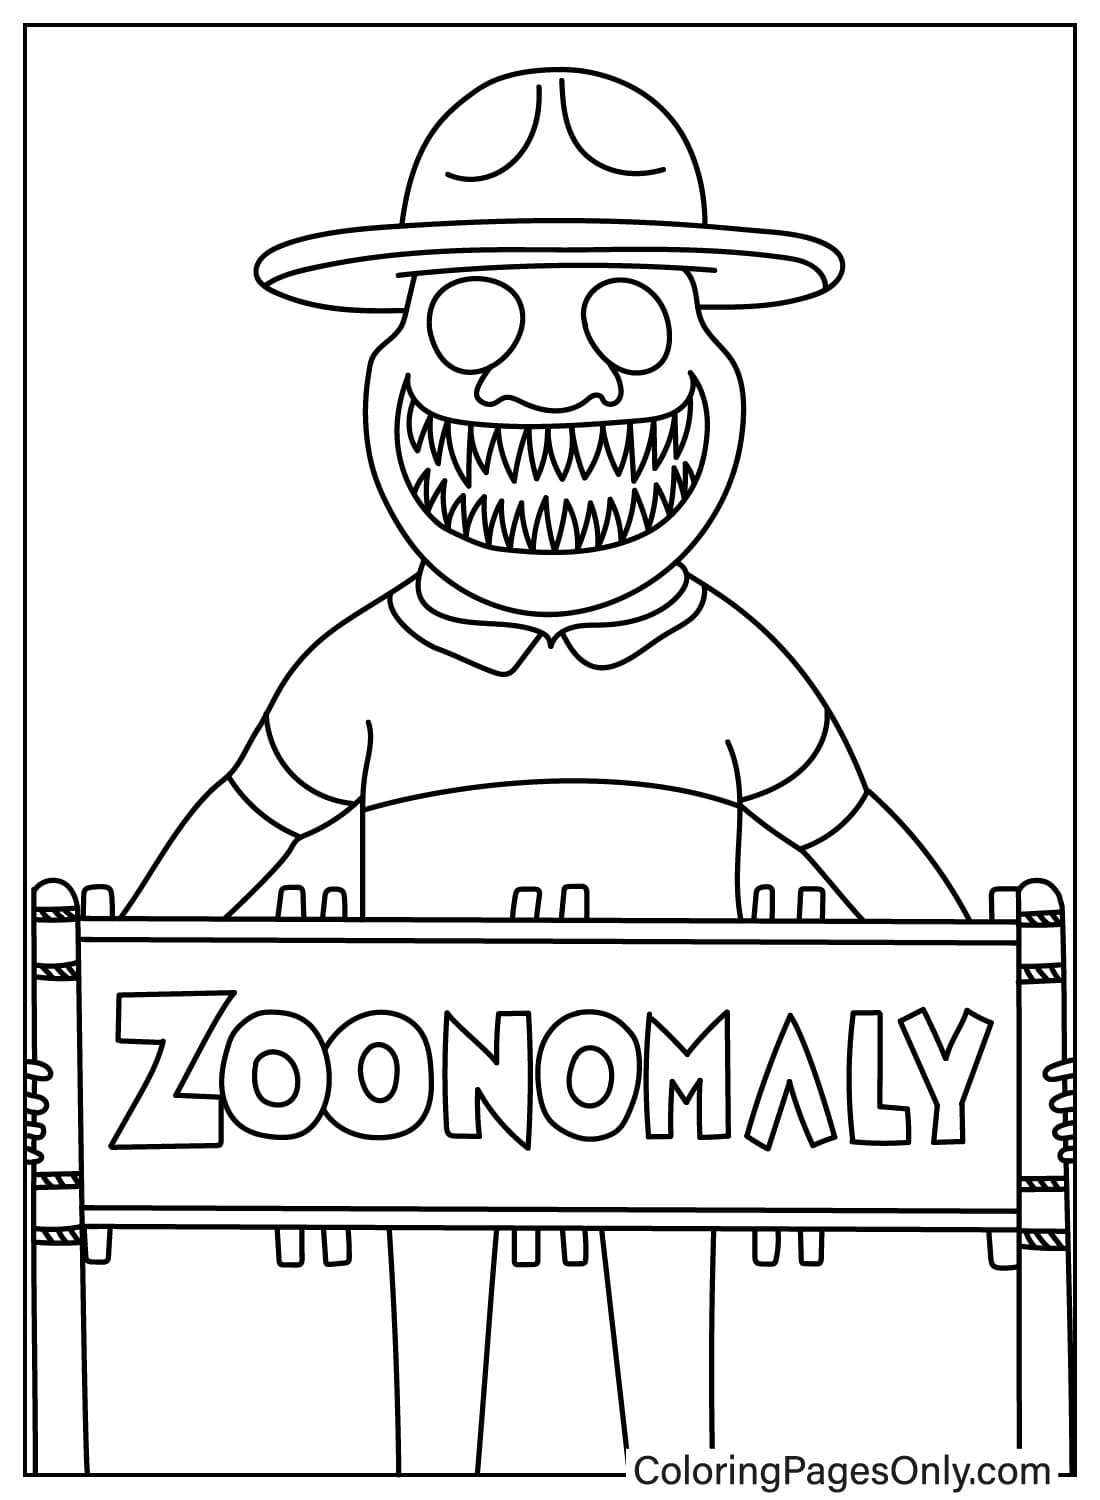 Zoonomaly Coloring Sheet from Zoonomaly